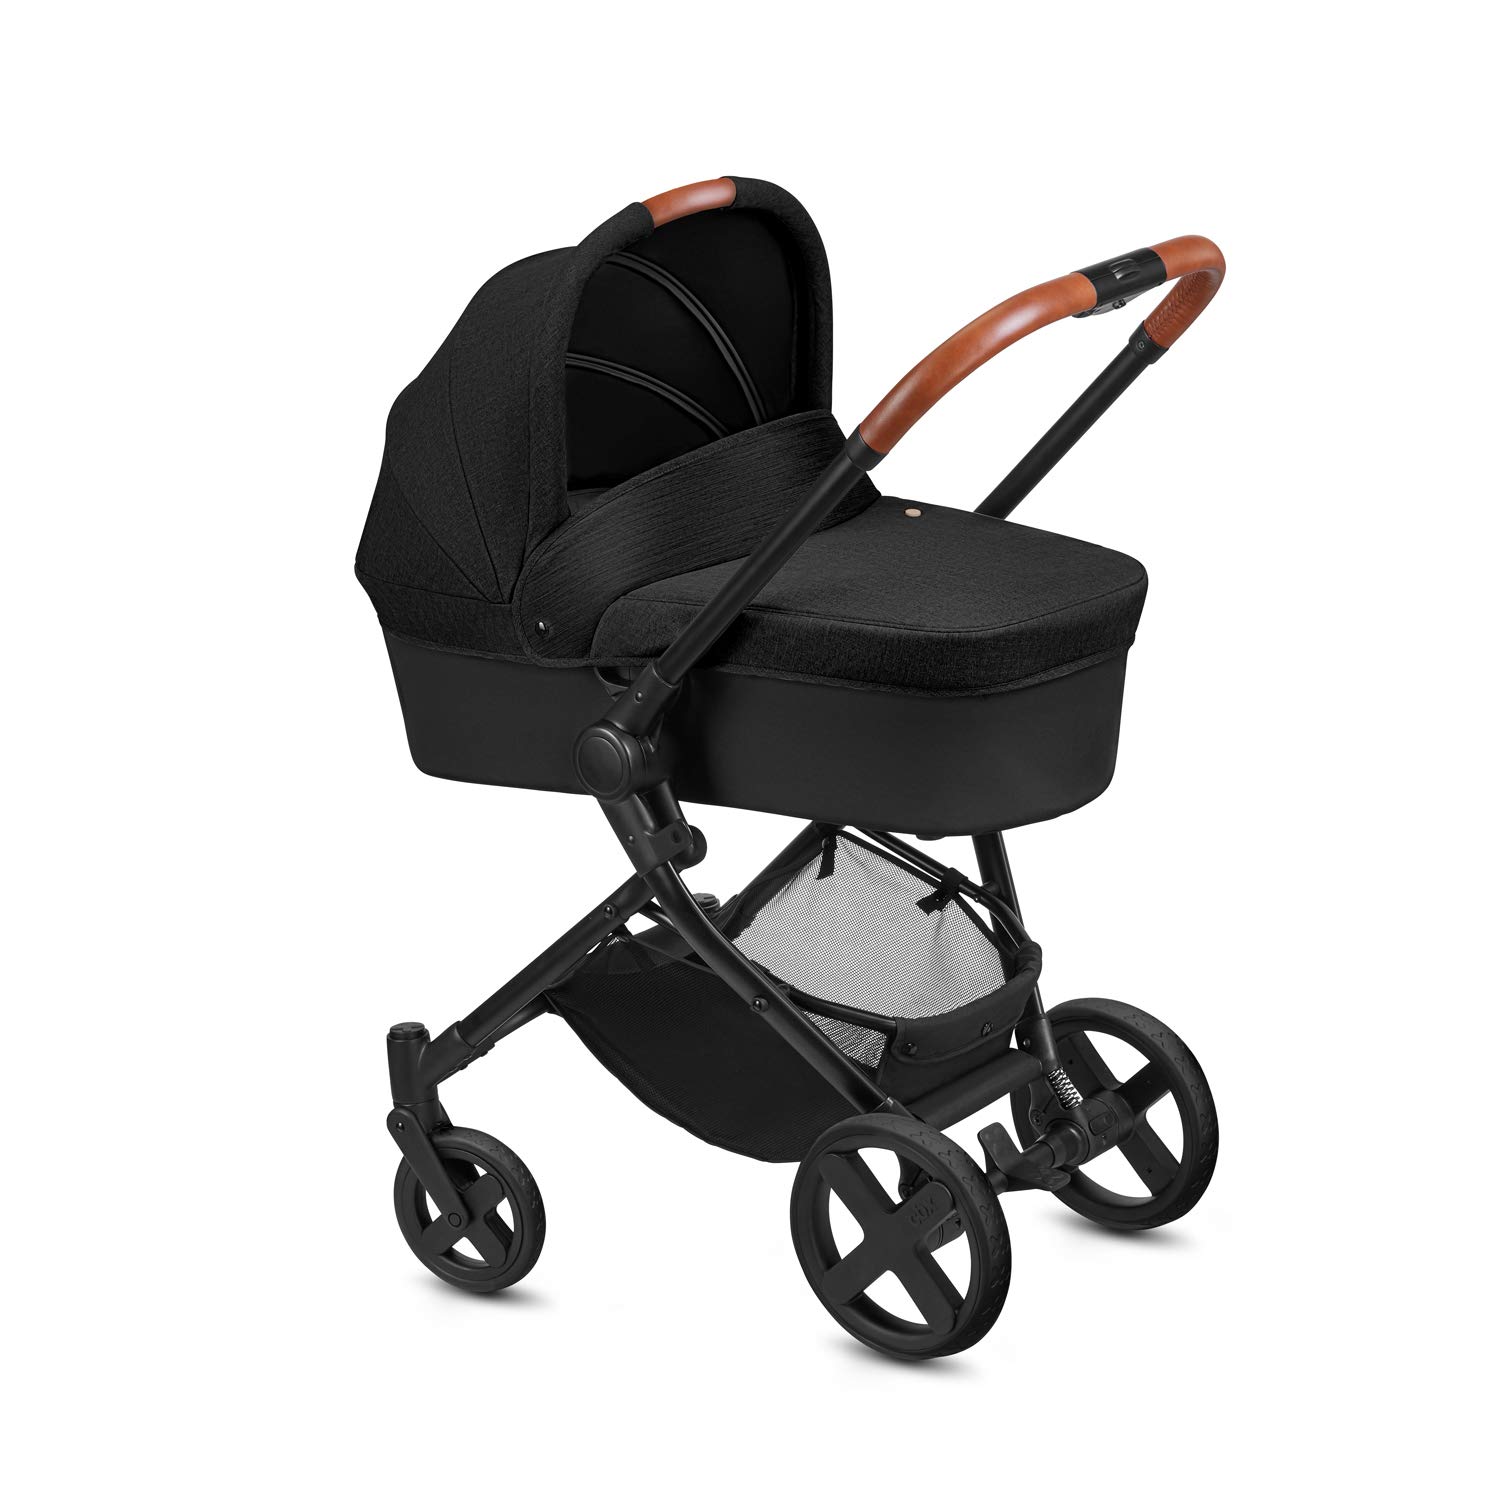 cbx Kody Pure Lux Combination Pushchair with Reversible Sports Seat and Carrycot with Leather Effect Details, Includes Rain Cover, From Birth to 15 kg, Smoky Anthracite